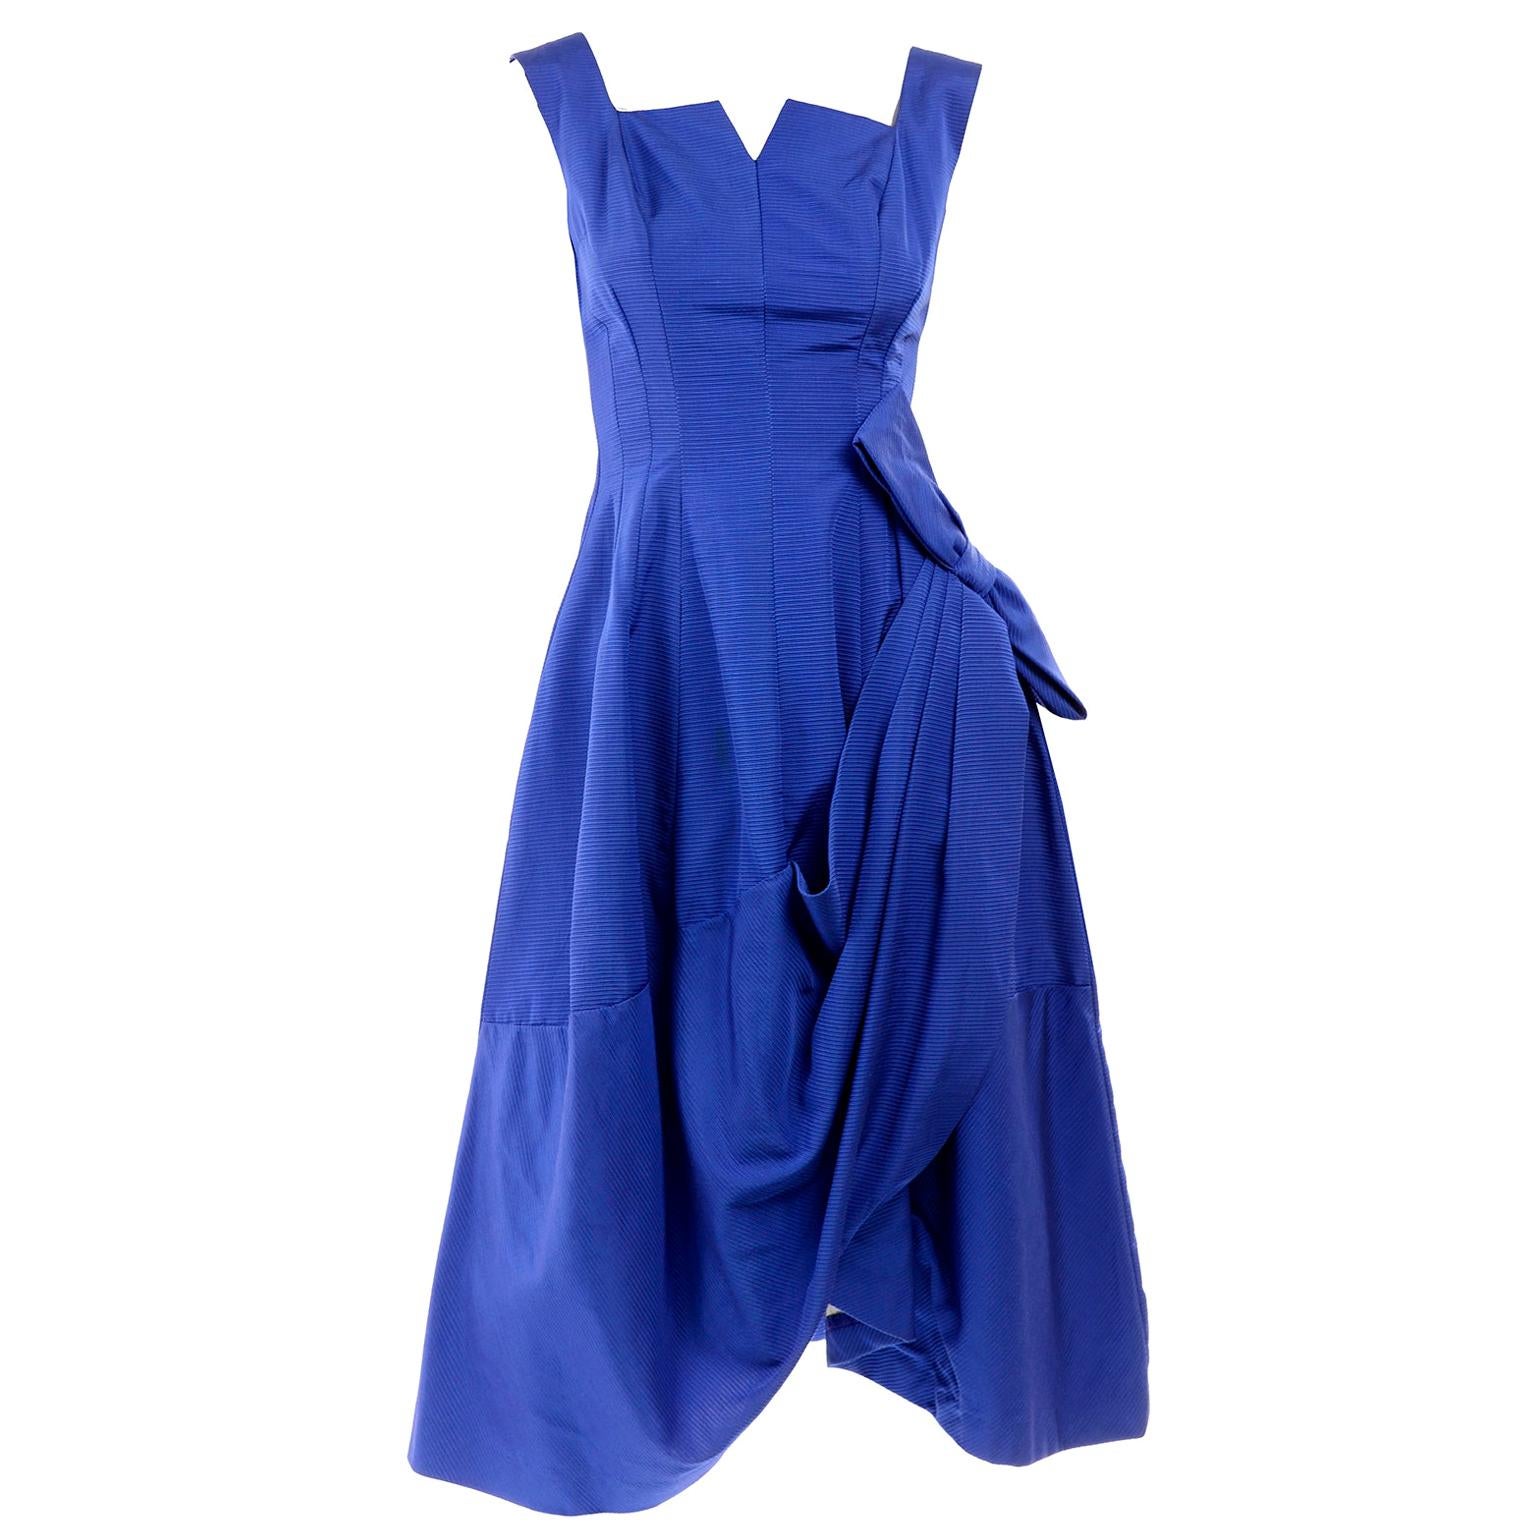 1950s Cobalt Blue Ribbed Vintage Evening Dress With Draping and Bow